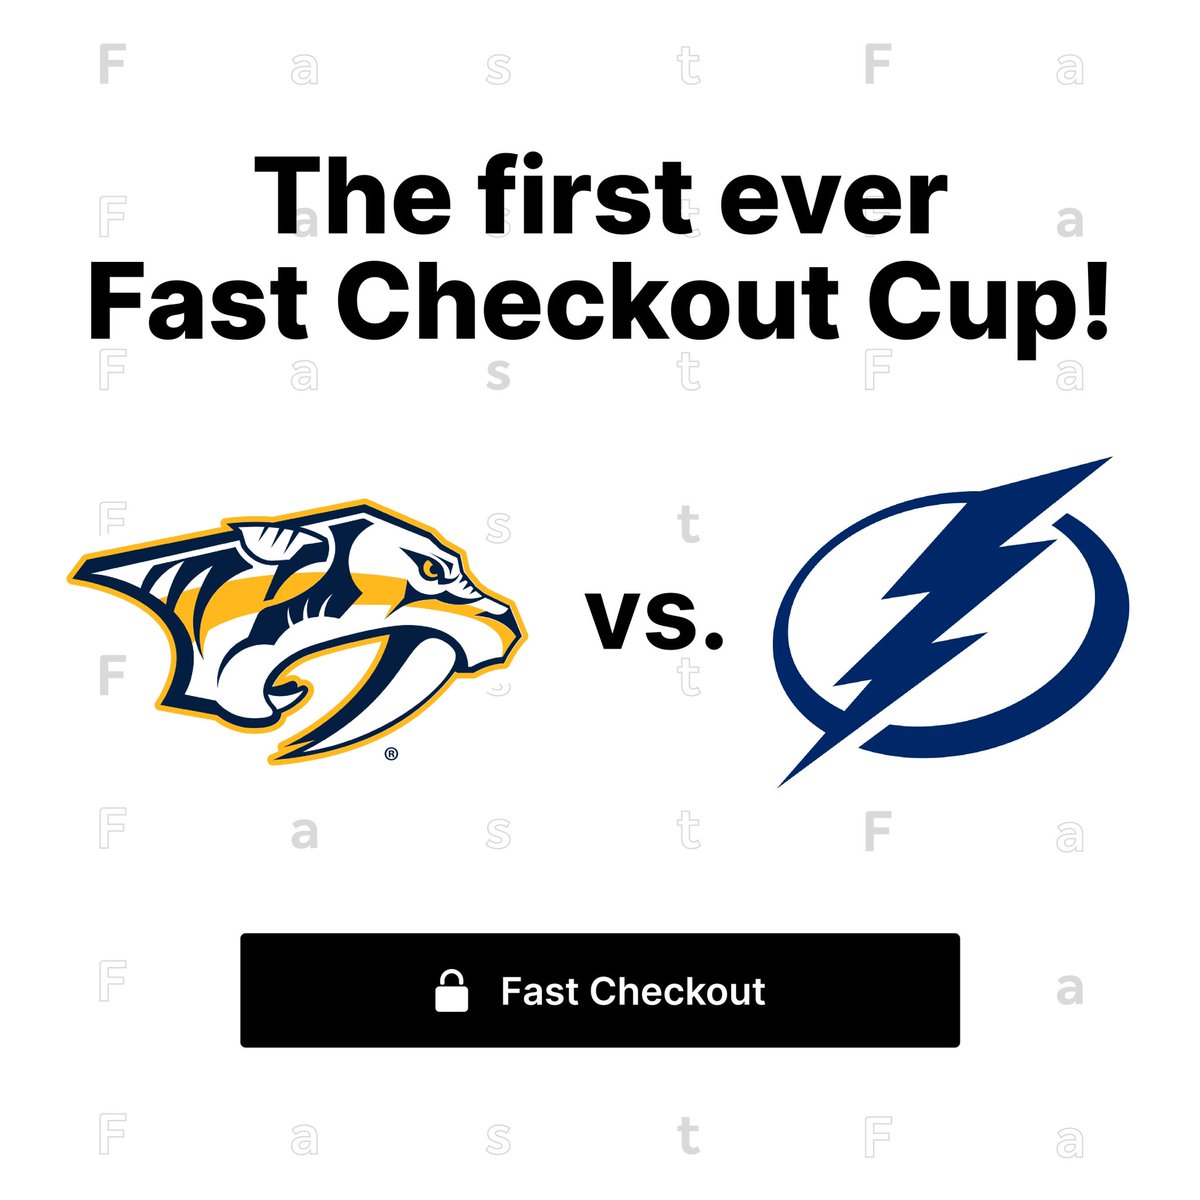 For the first time ever, two official one-click checkout partner teams face off. Who ya got: @nhlpredators or @tblightning?